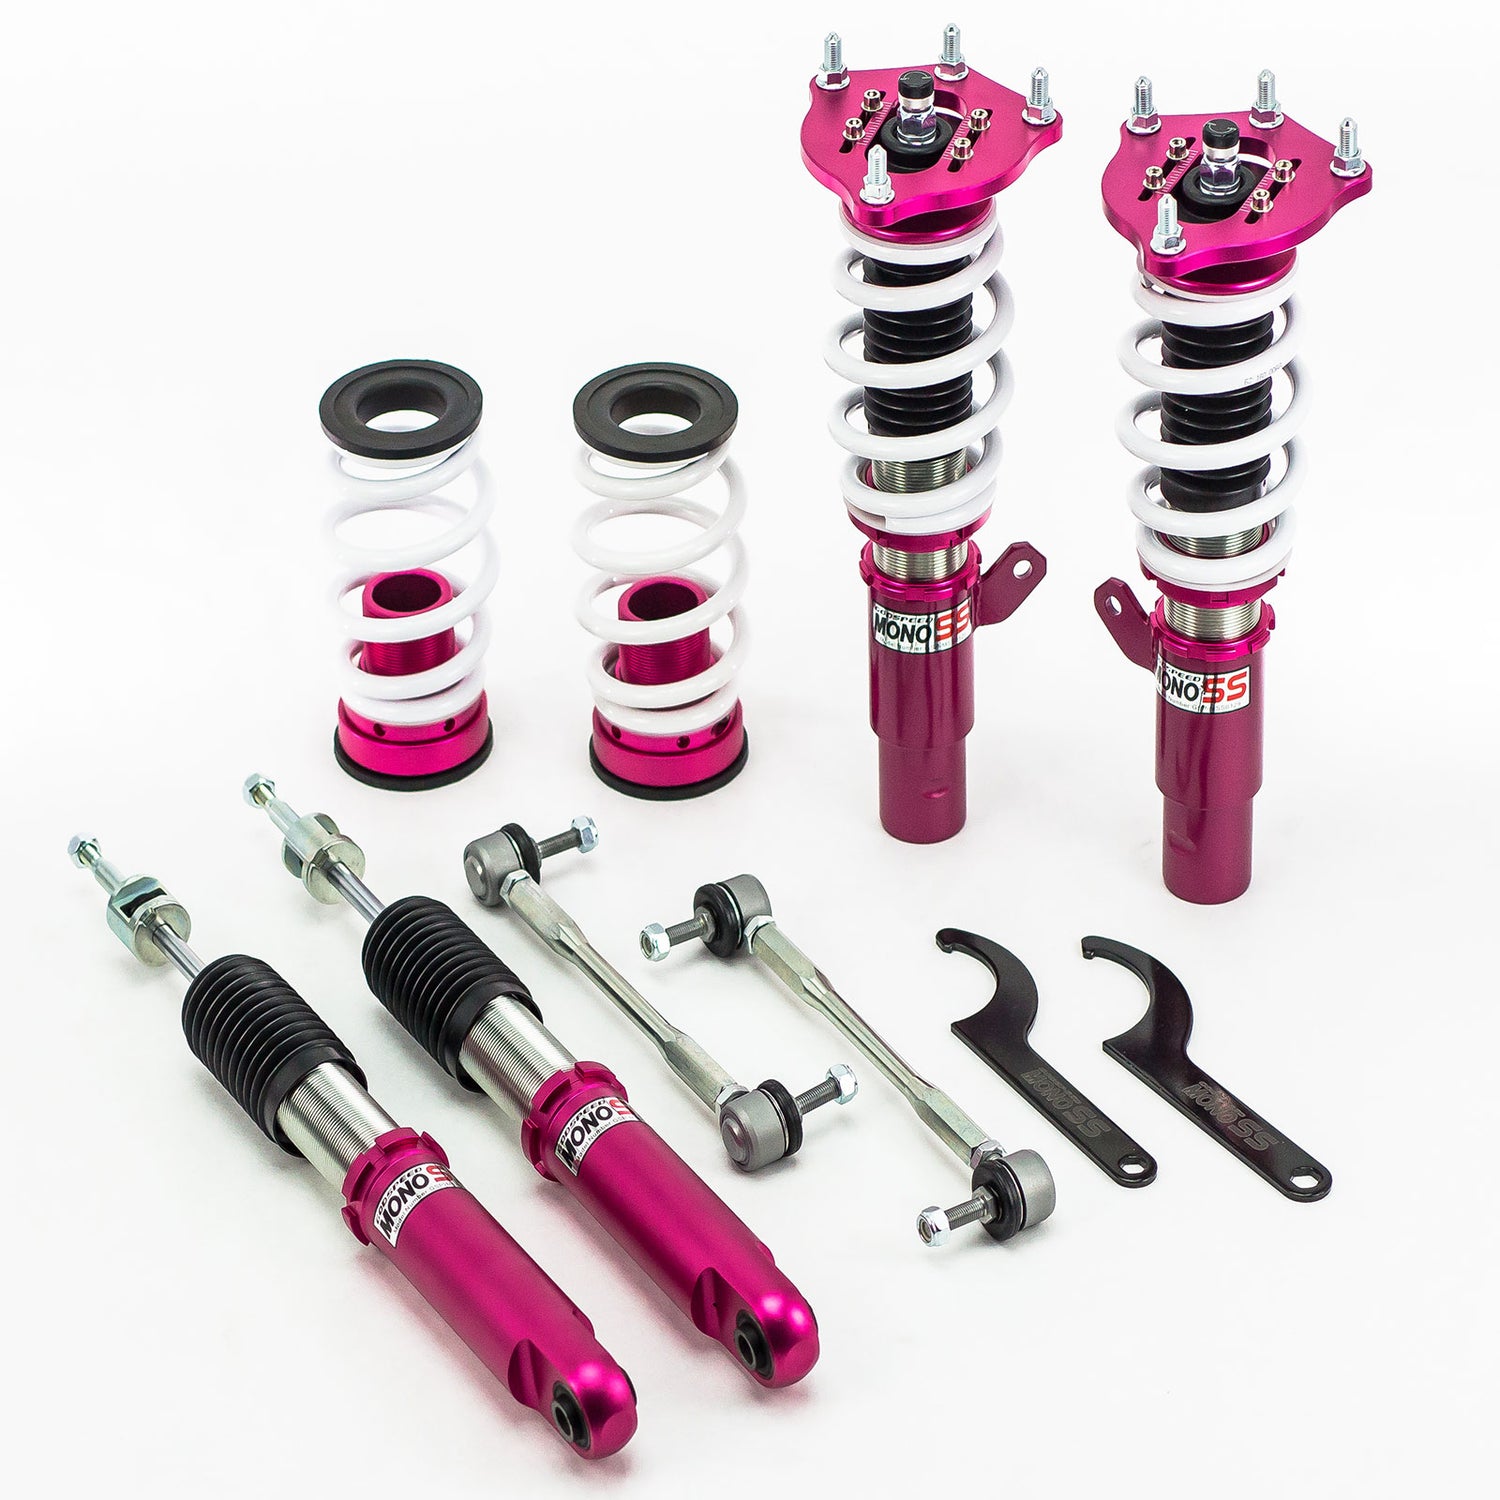 Godspeed MSS0129-54 MonoSS Coilover Lowering Kit, Fully Adjustable, Ride Height, Spring Tension And 16 Click Damping, Honda Civic Si(FC) 2016+UP